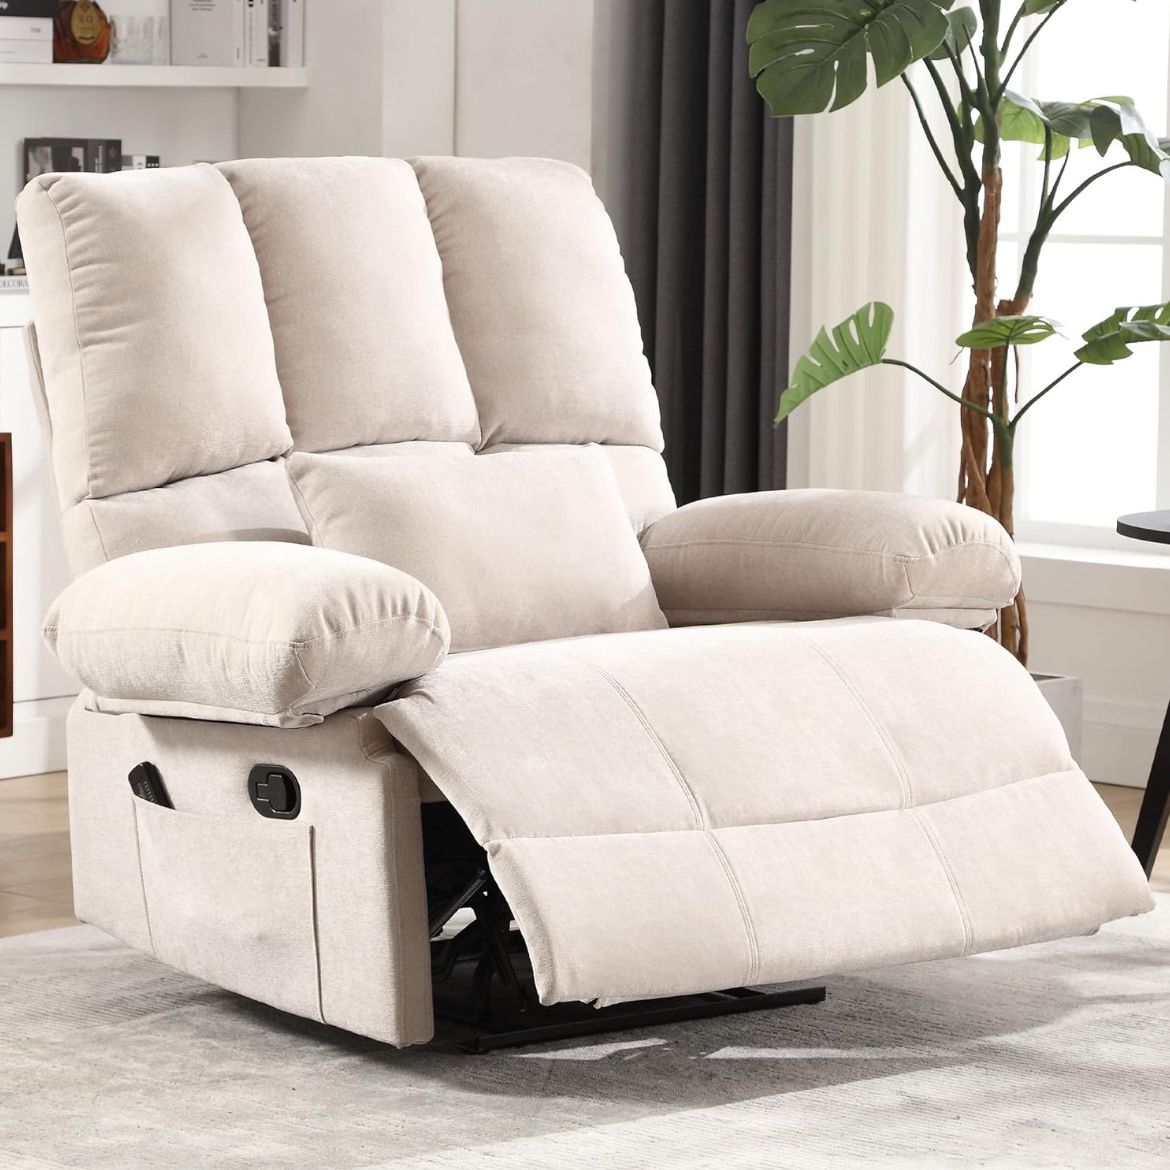 Oversized Recliner Chair - 350 lb Weight Capacity